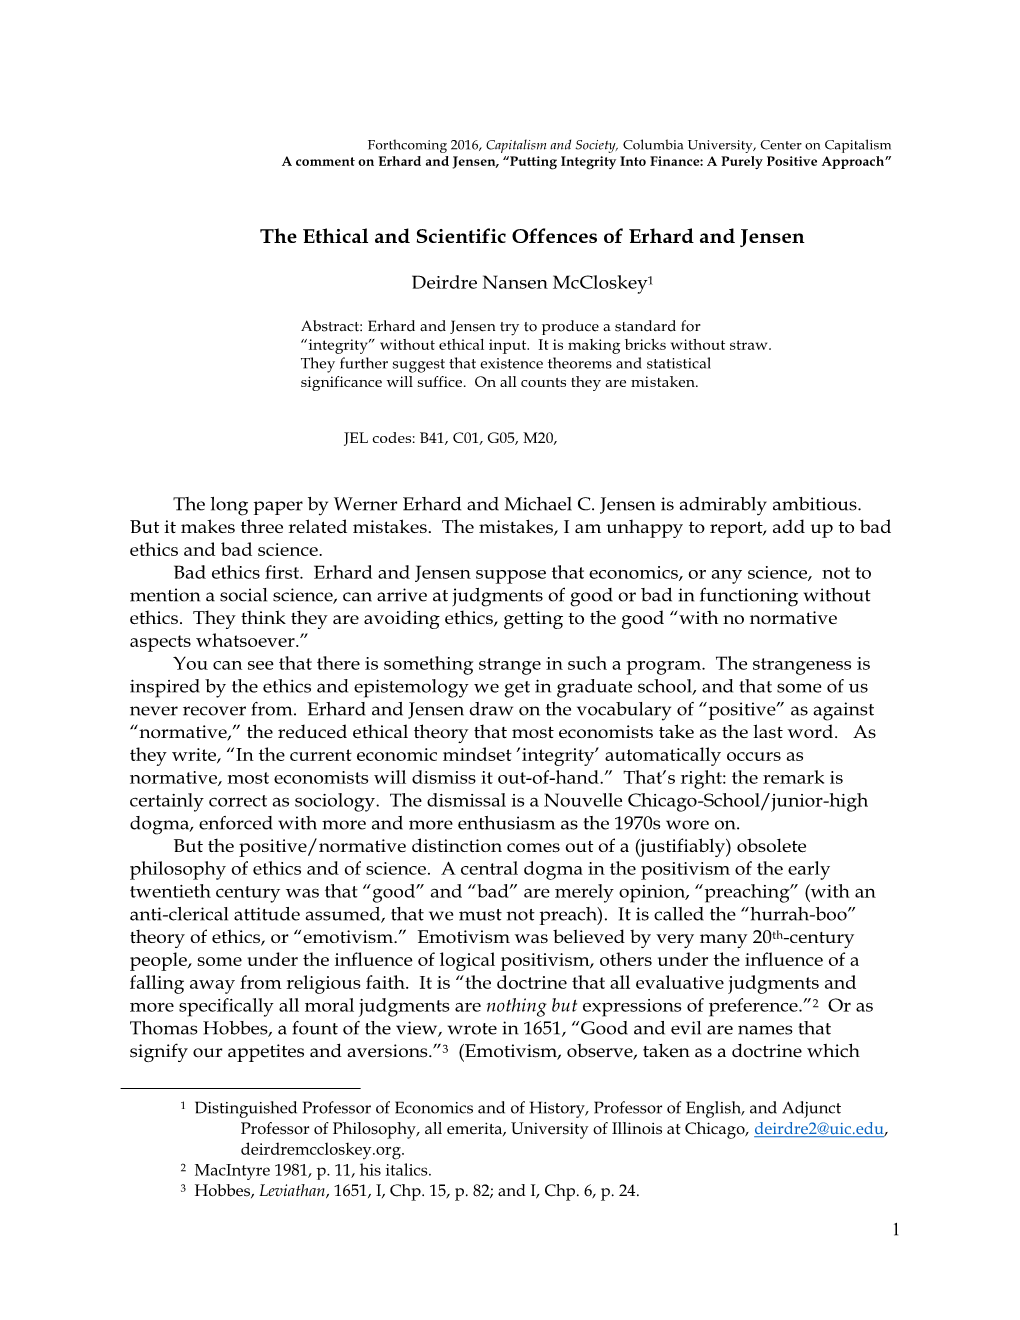 The Ethical and Scientific Offences of Erhard and Jensen